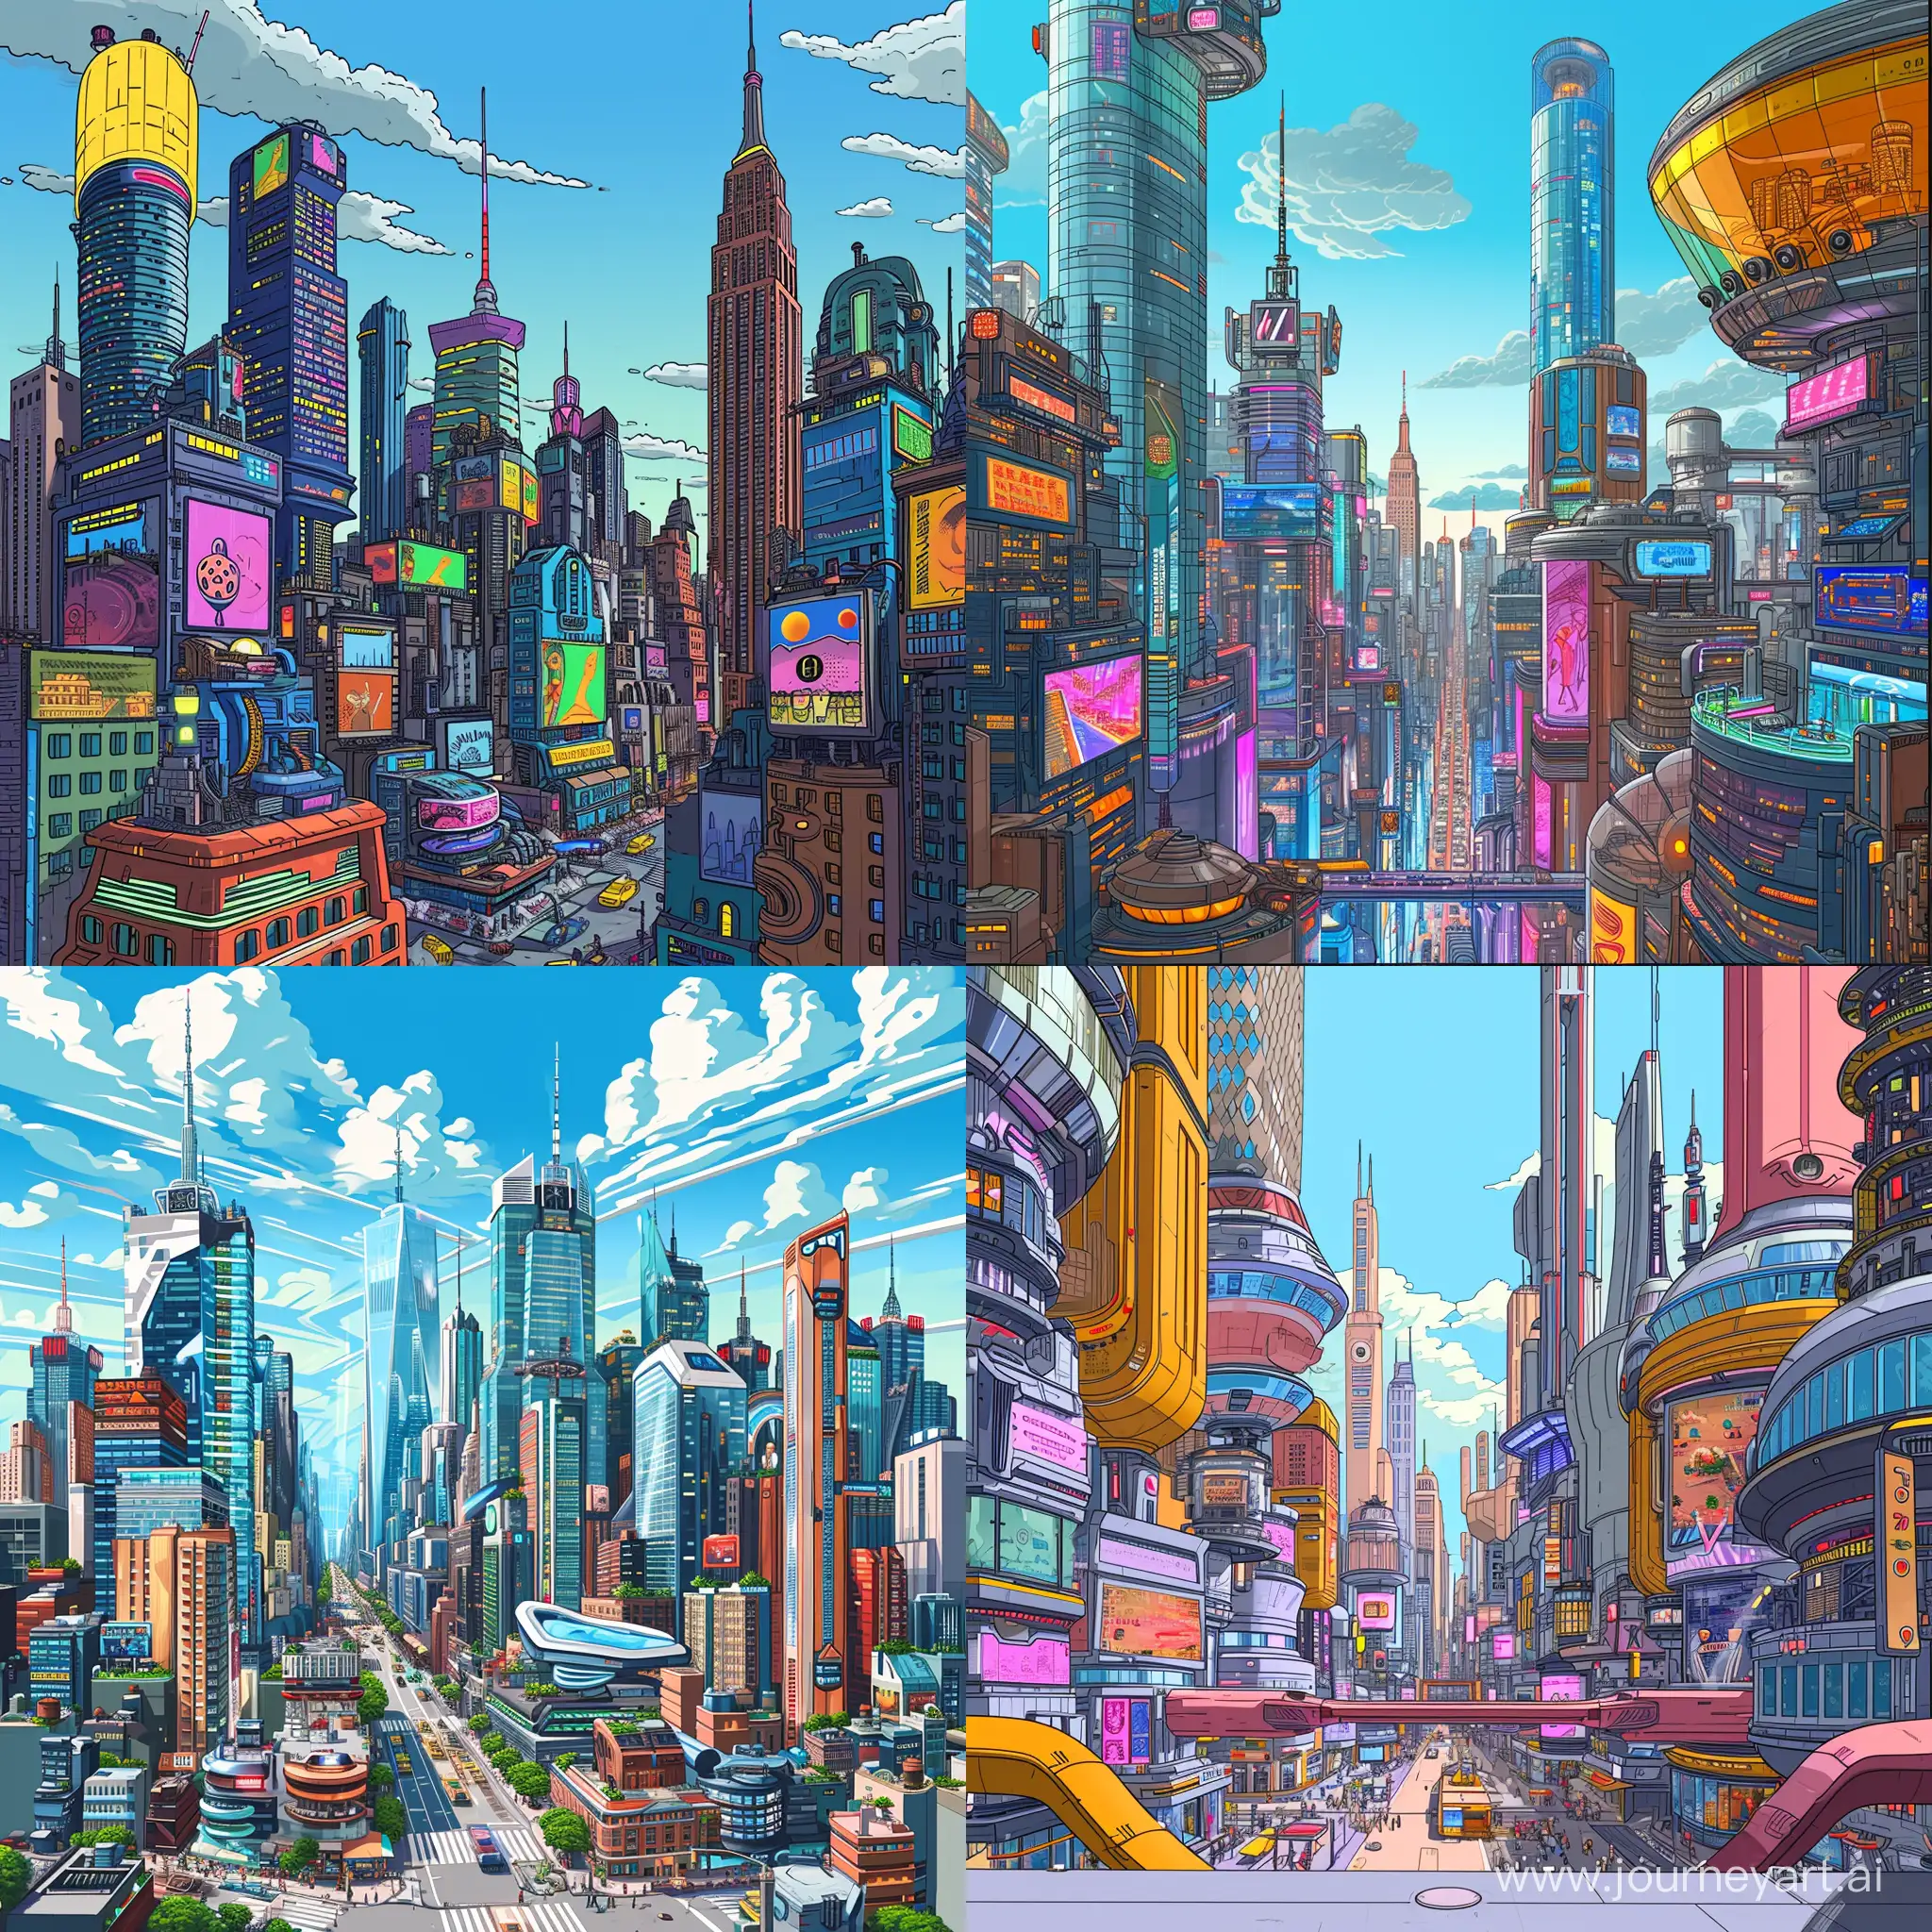 Vibrant-Futuristic-Cartoon-Drawing-of-New-York-City-in-the-2020s